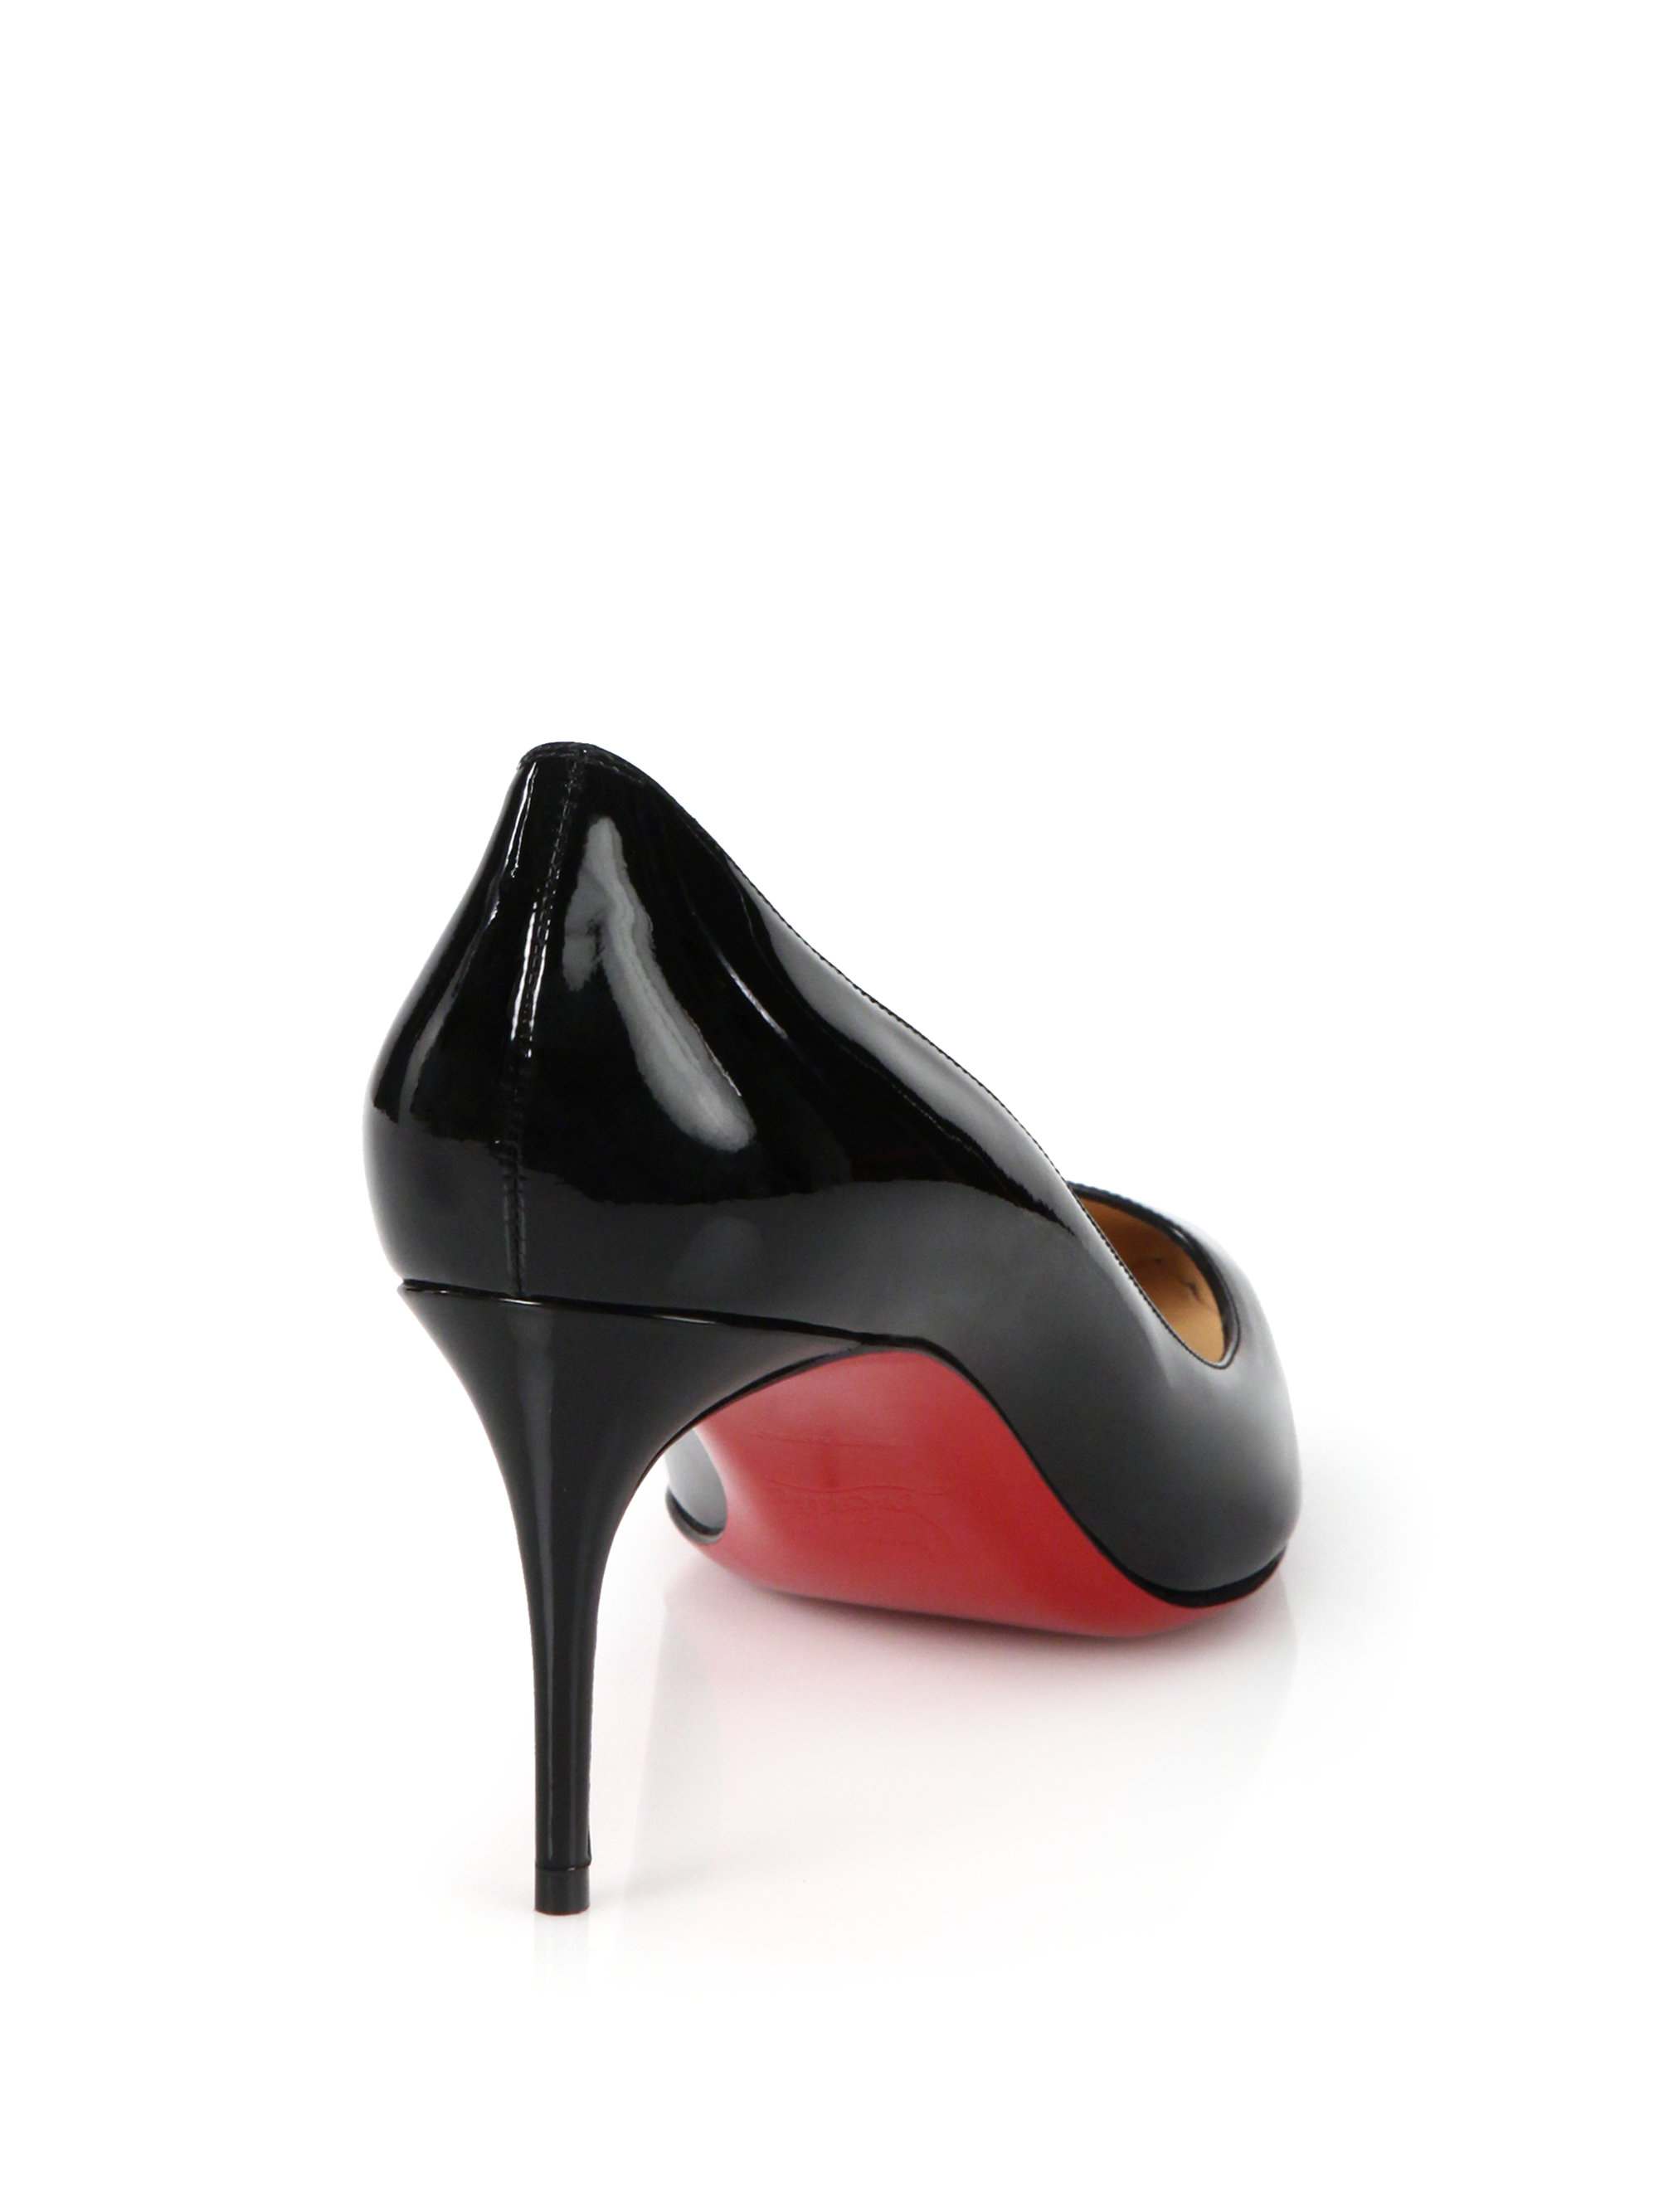 christian louboutin pointed-toe pumps Black patent leather flower ...